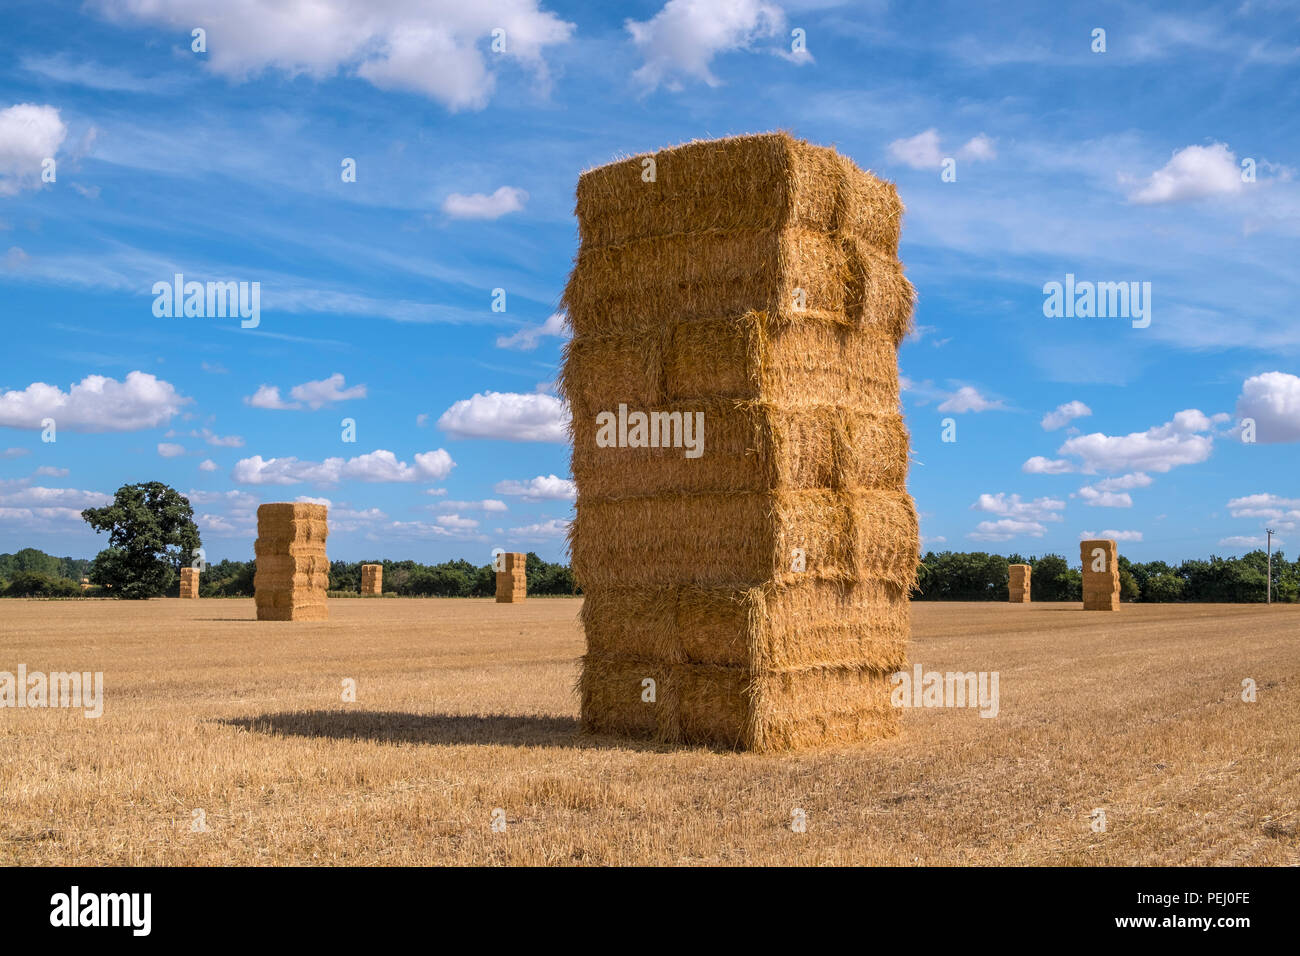 Bales of straw in a field at harvest time. Suffolk, UK. Stock Photo